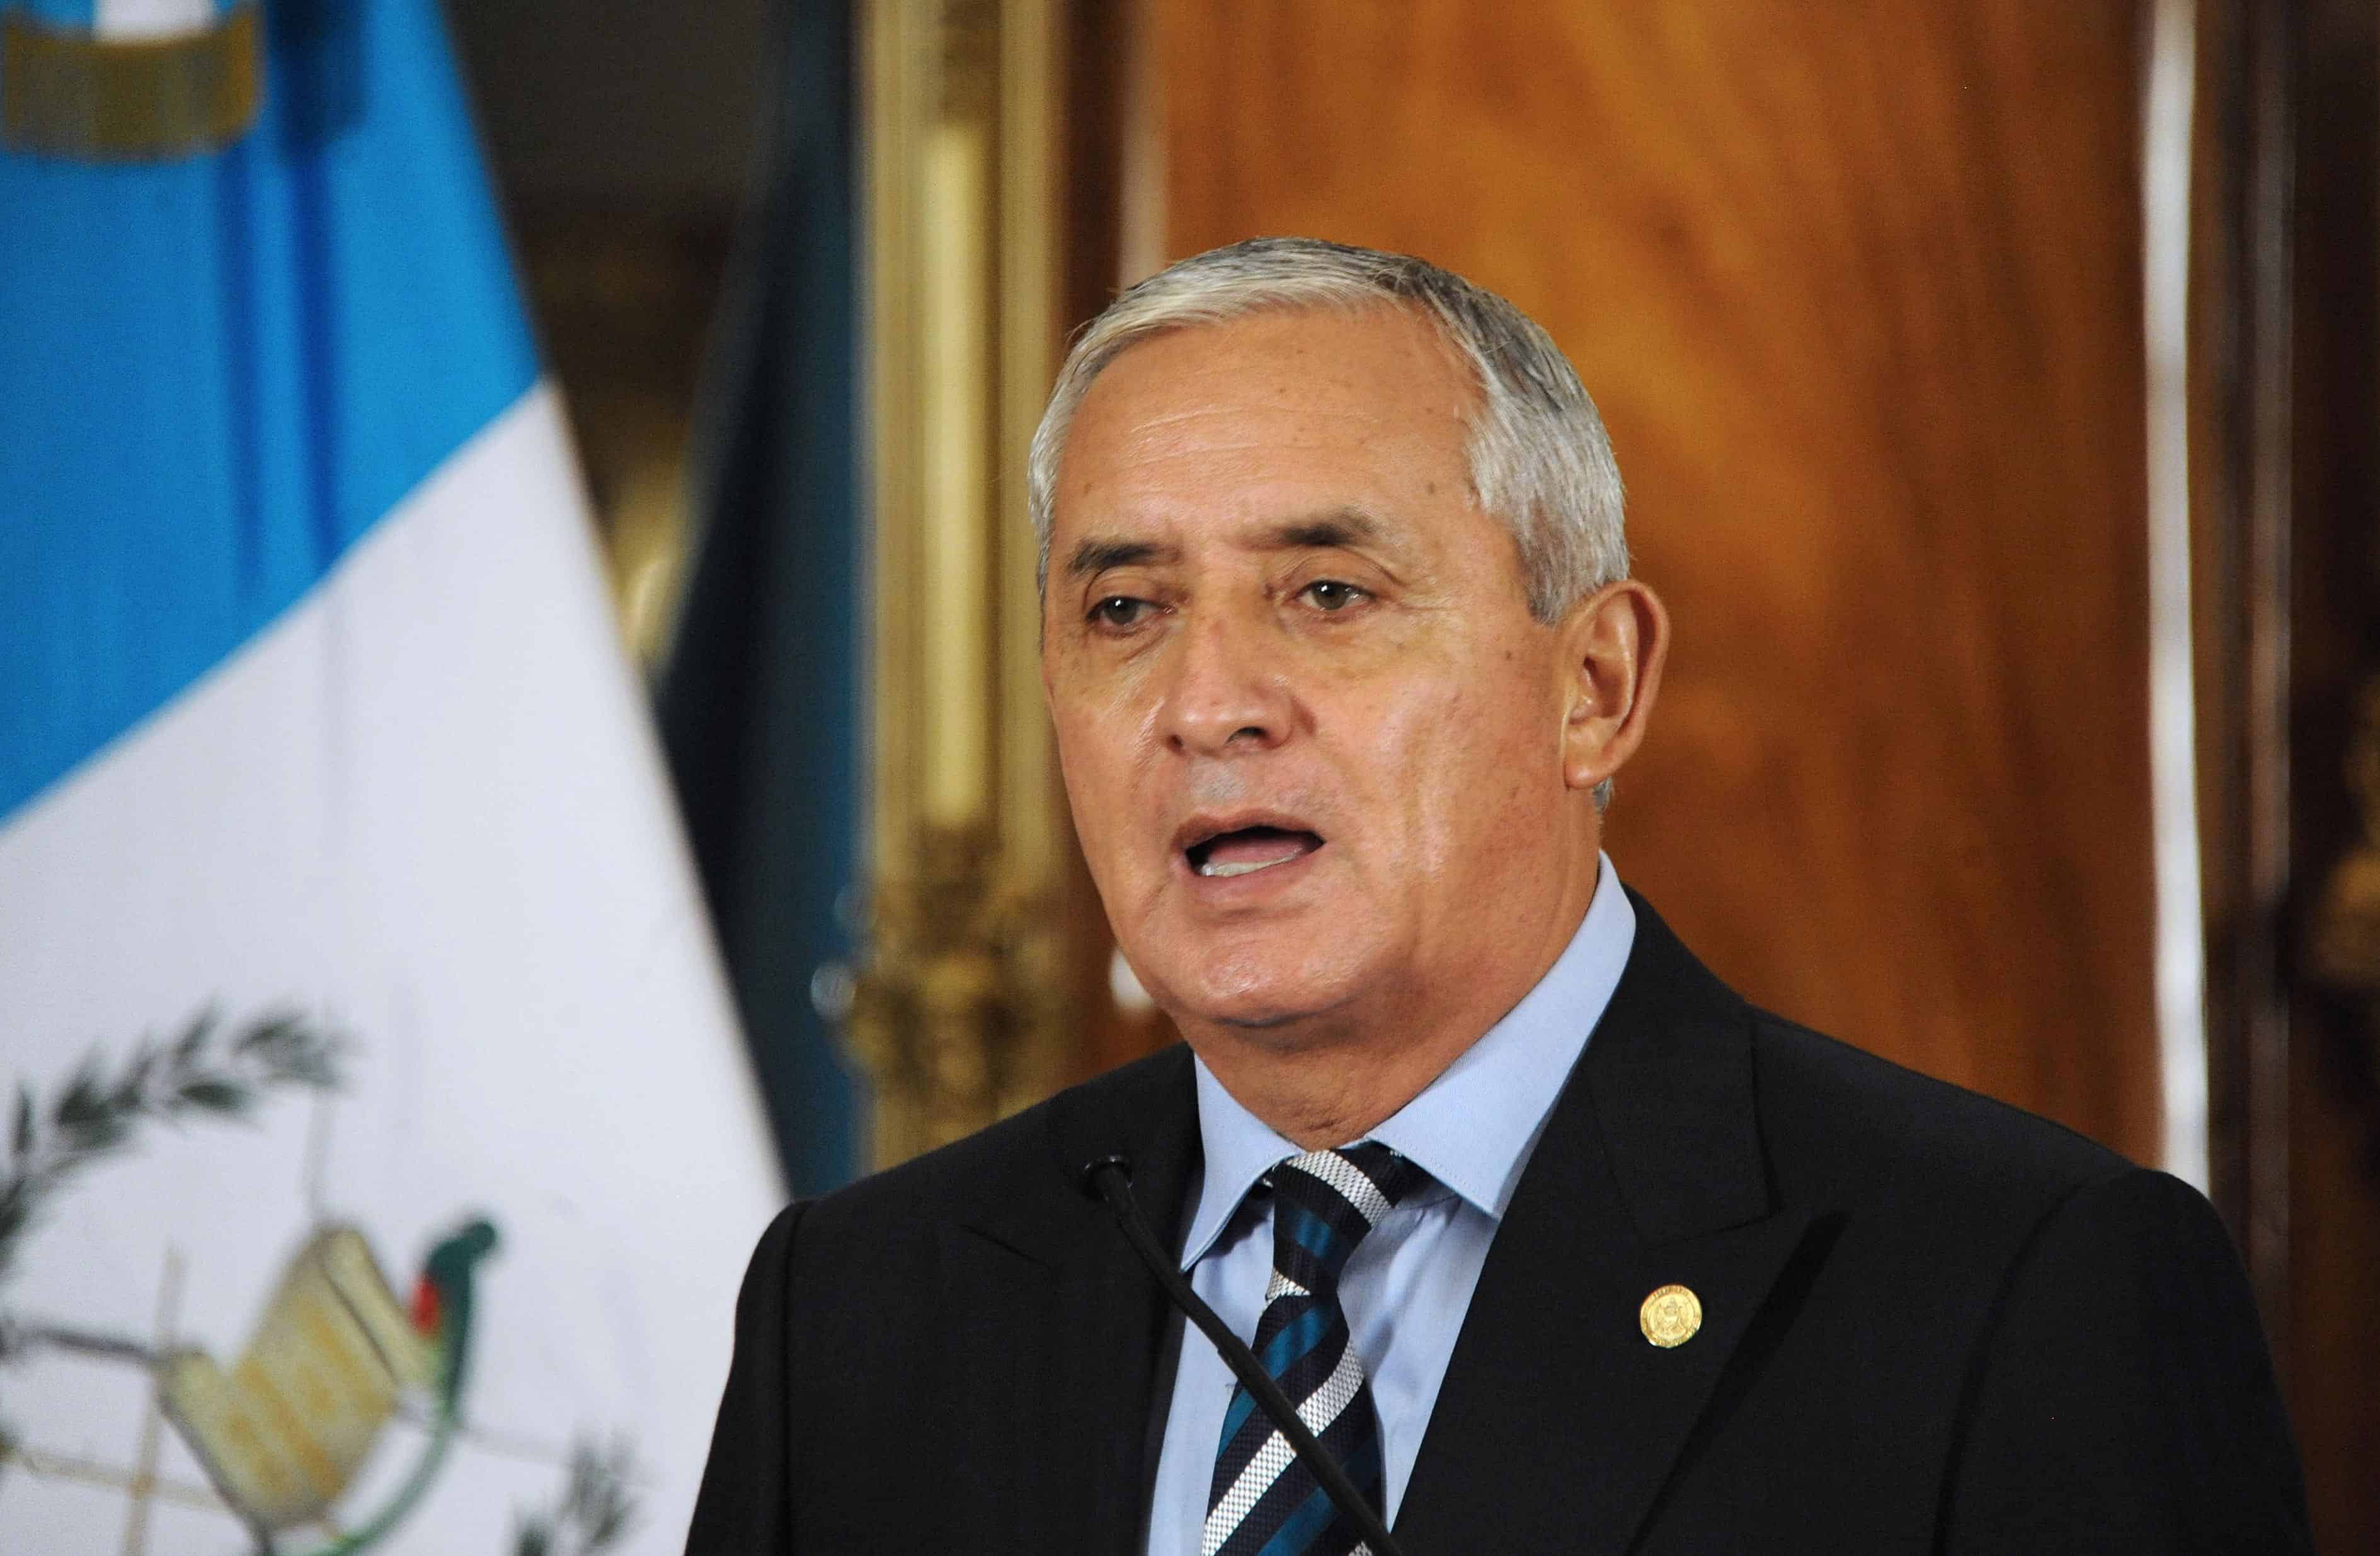 Guatemalan President Otto Pérez Molina offers a press conference at the presidential palace in Guatemala City on May 21, 2015.